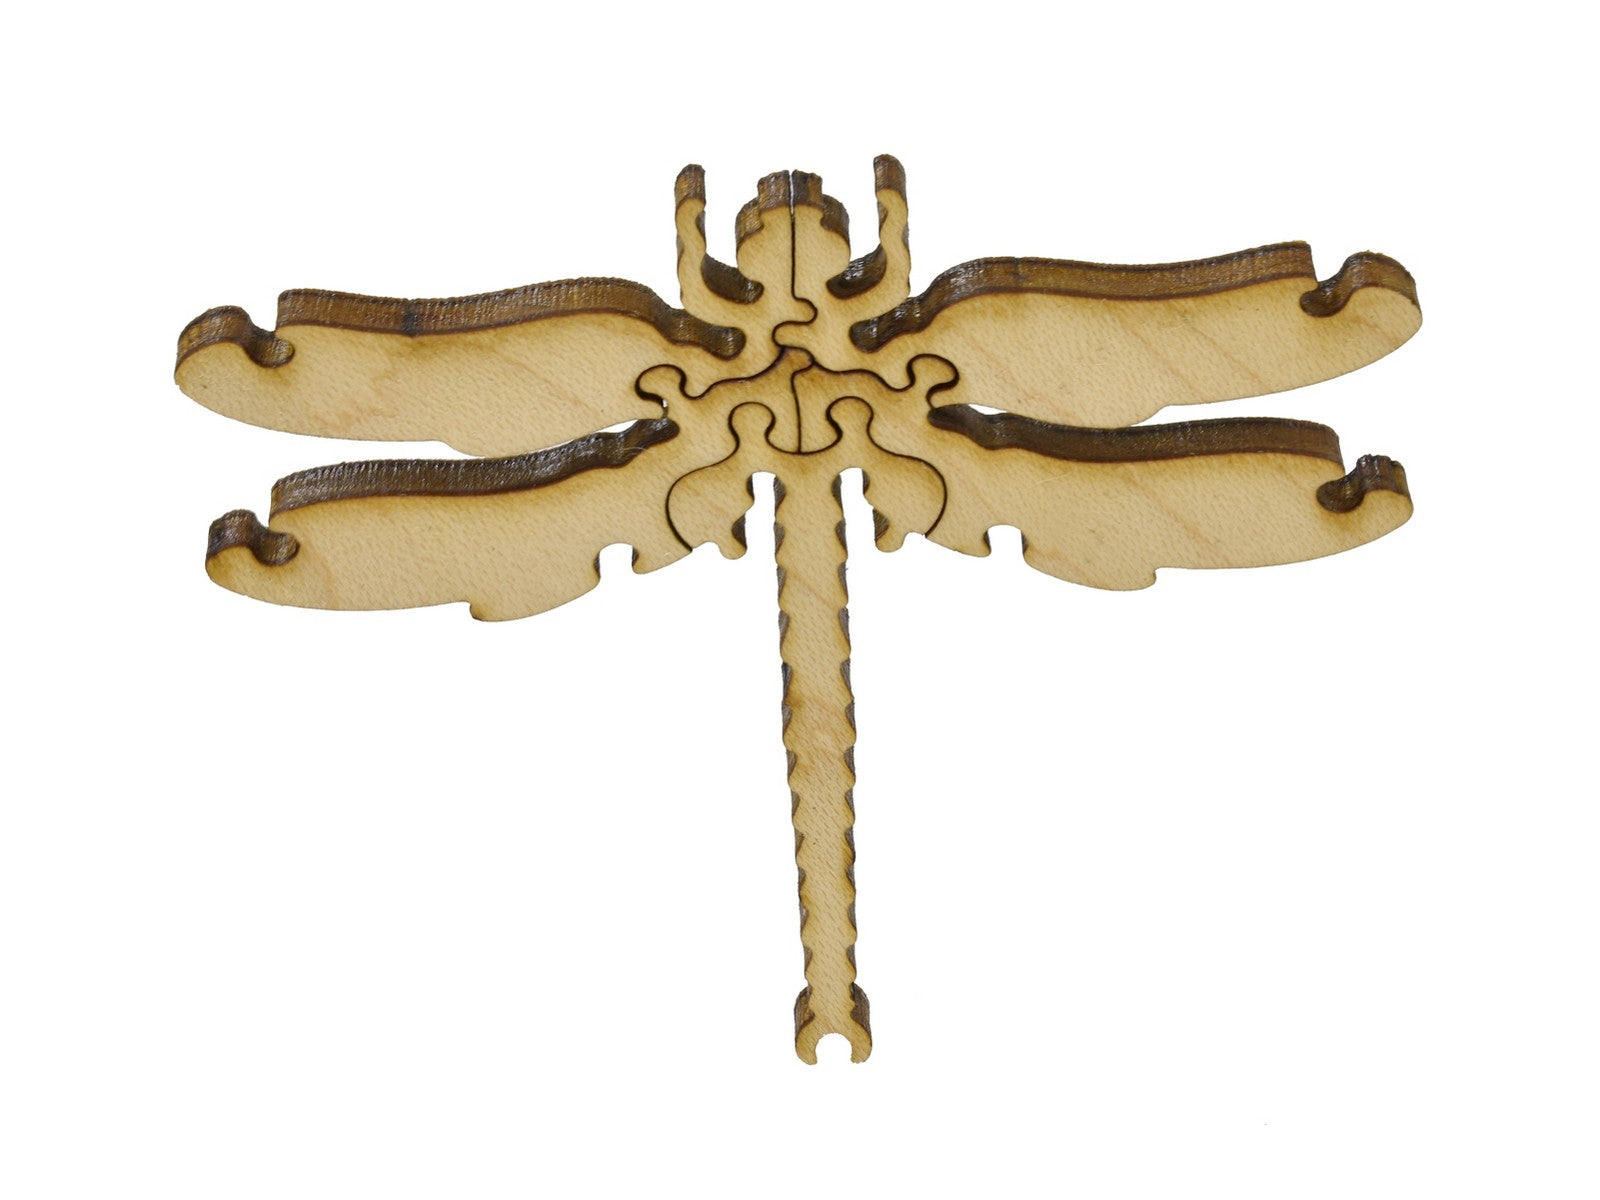 A closeup of pieces in the shape of a dragonfly.